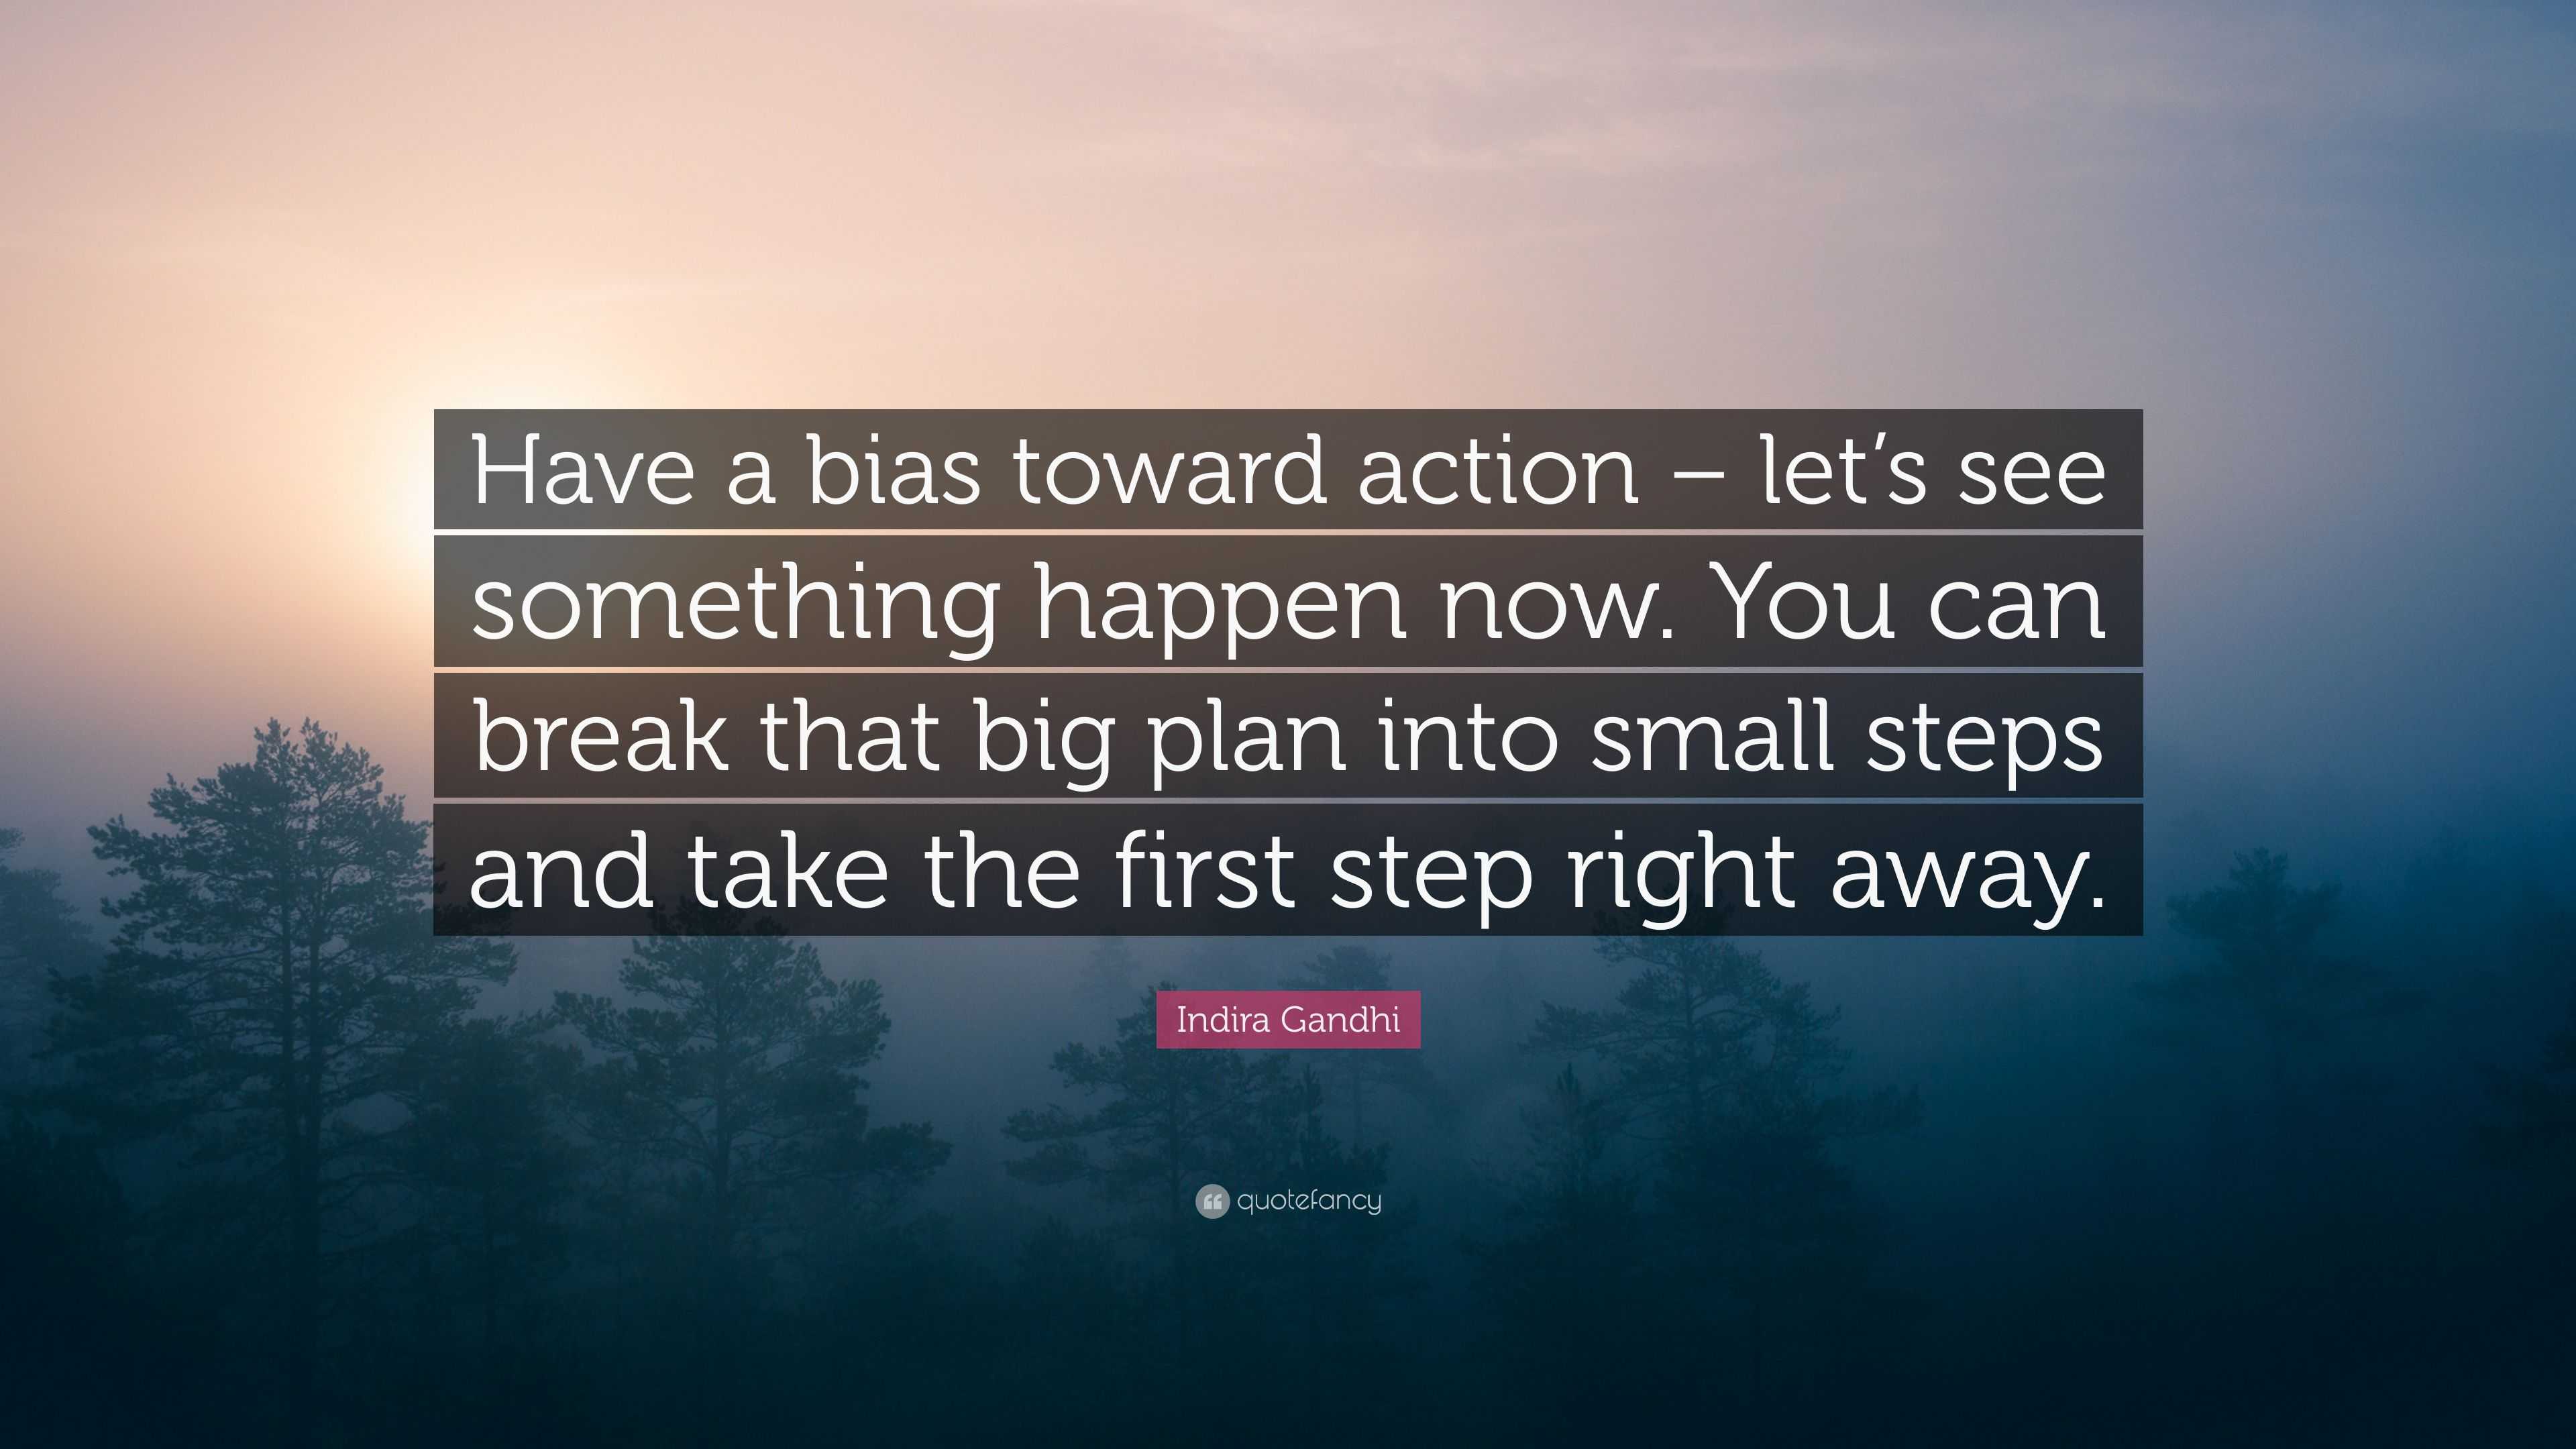 Indira Gandhi Quote: “Have a bias toward action – let’s see something